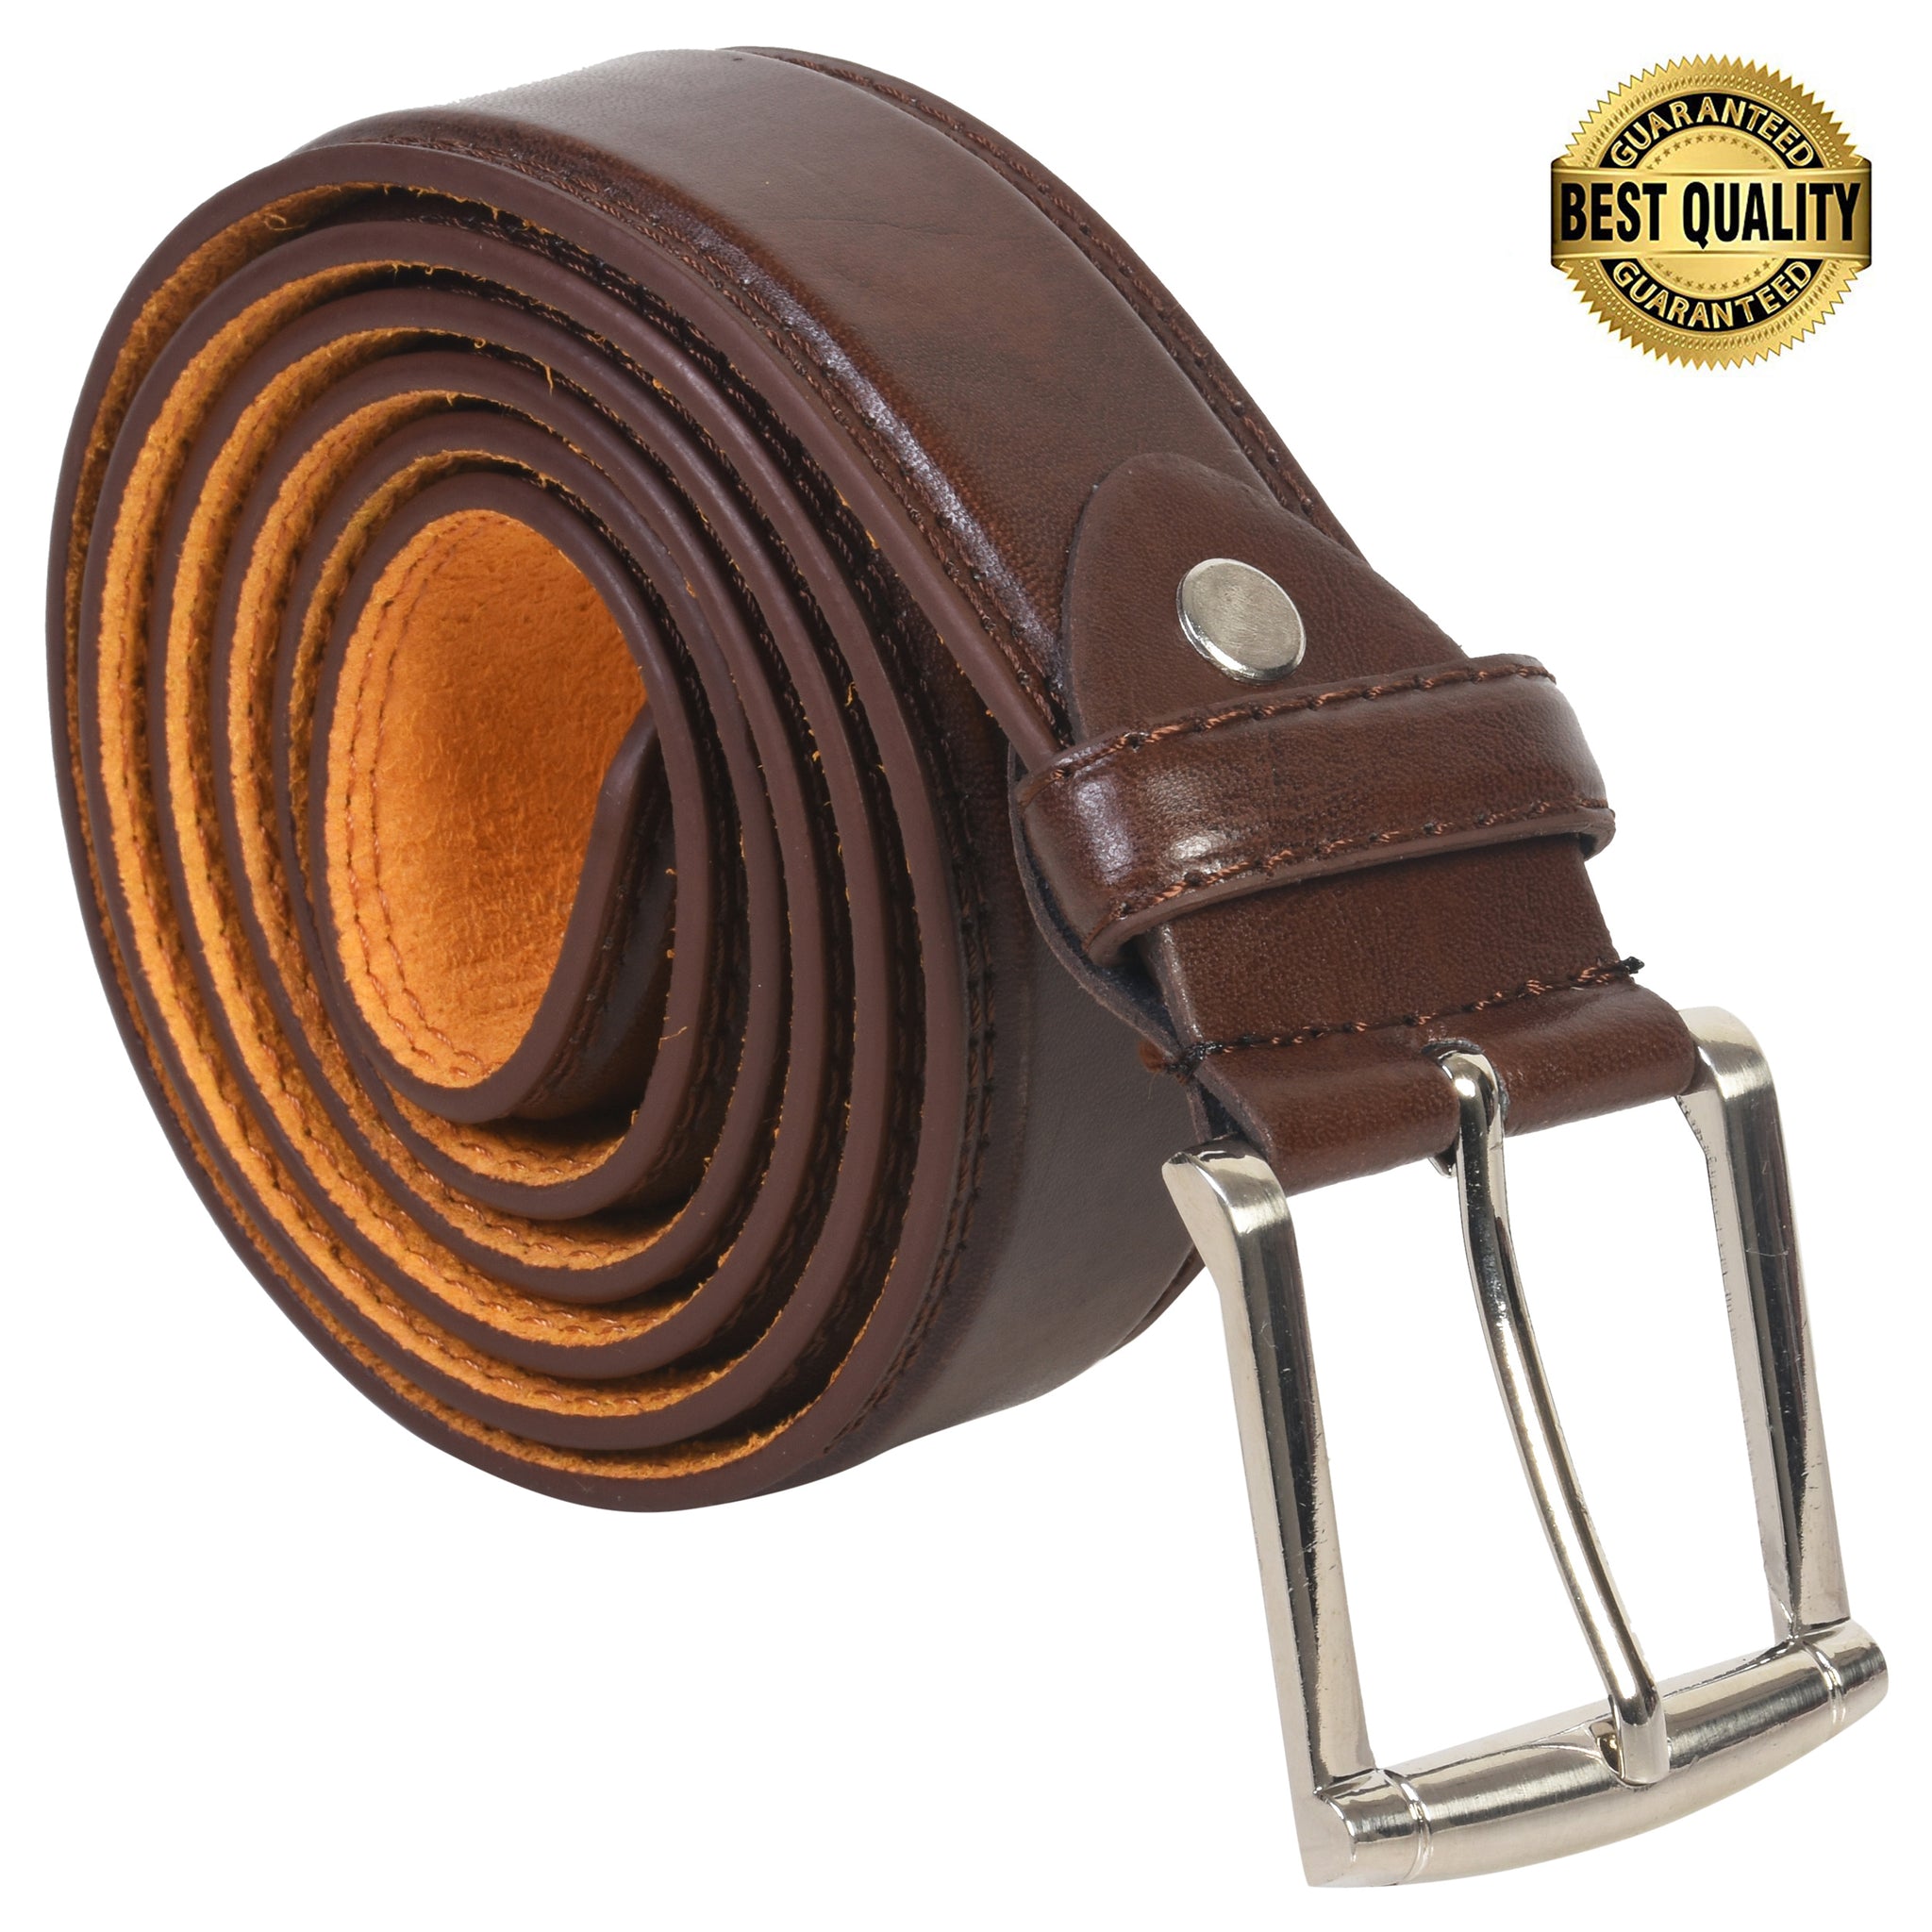 Leatherboss Genuine Leather Men's Stylish Casual Jeans Belt, Brown